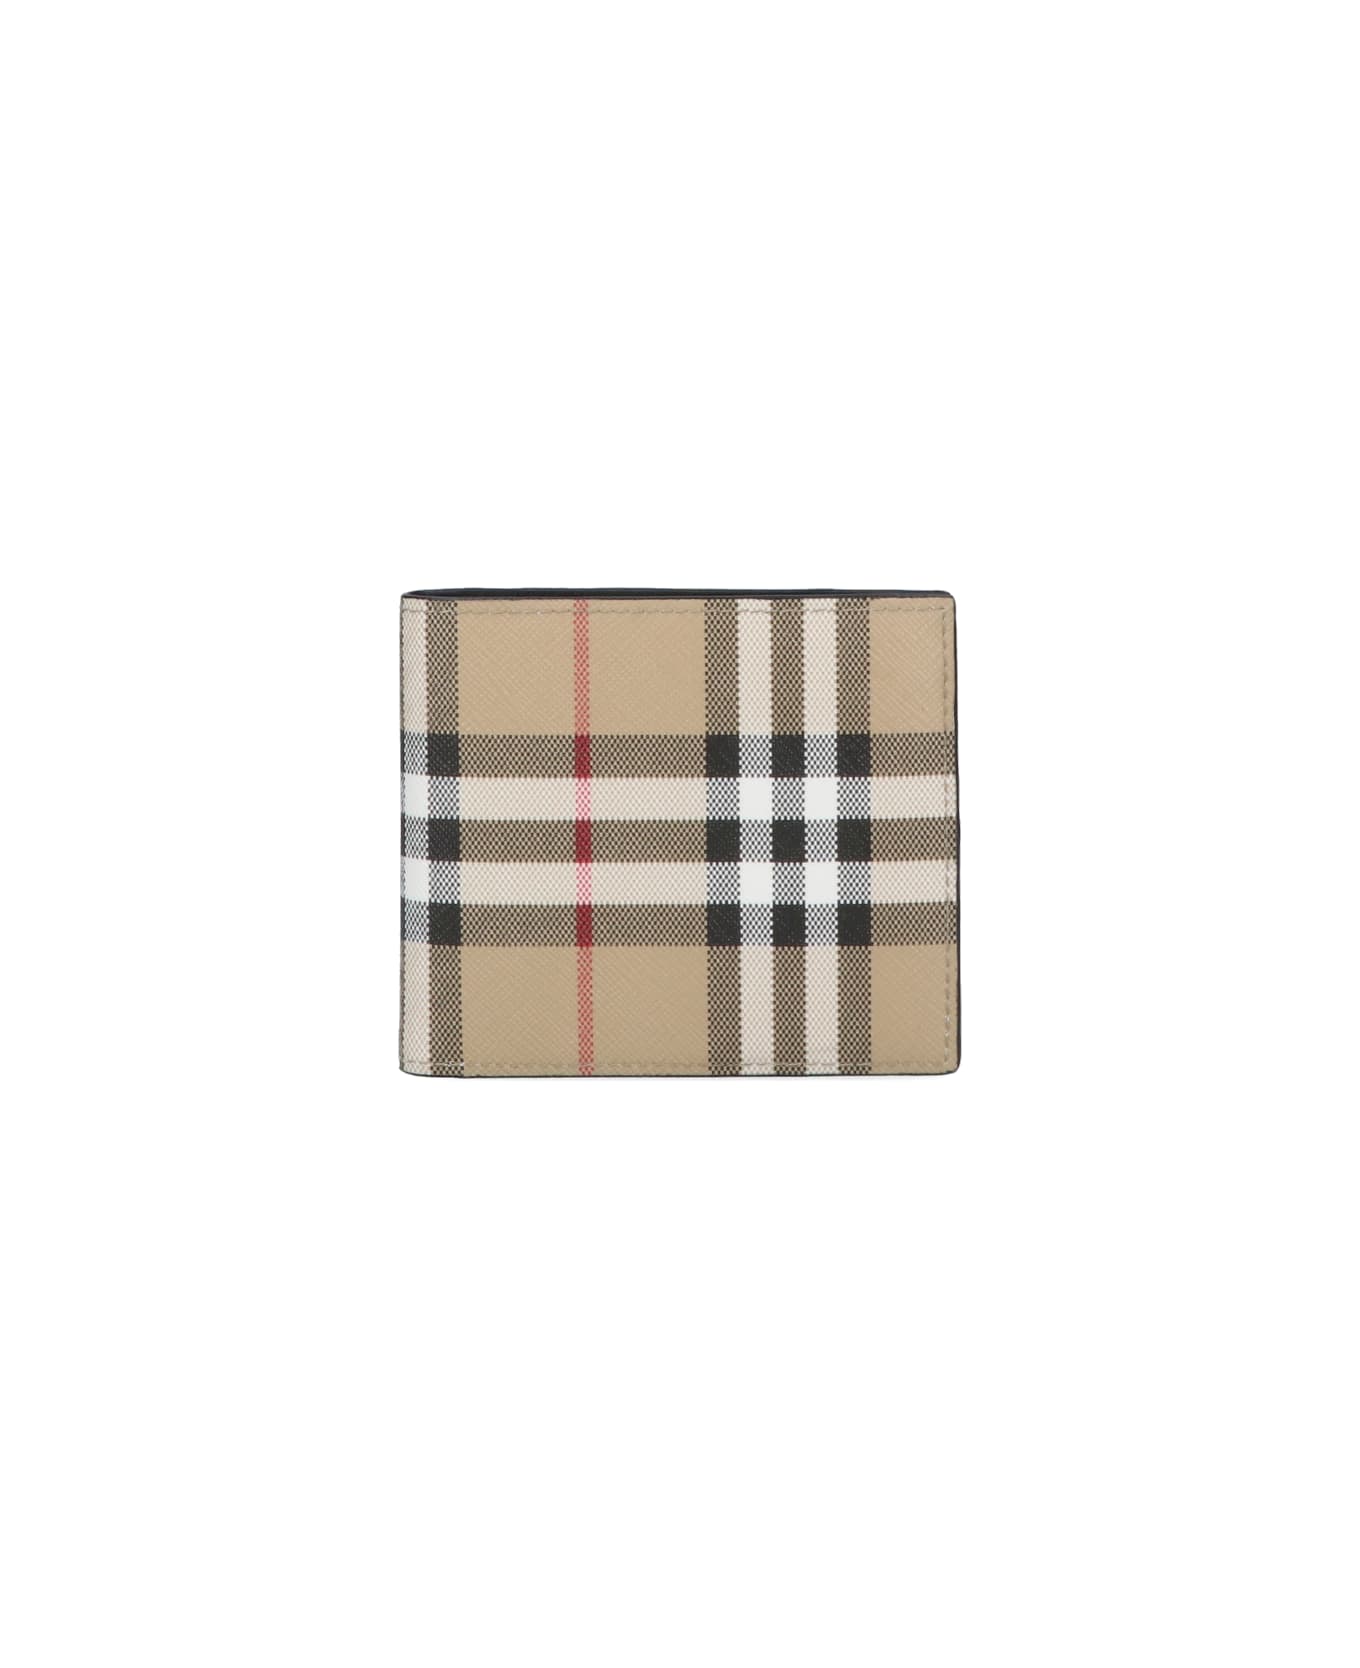 Burberry Printed E-canvas Wallet - Beige